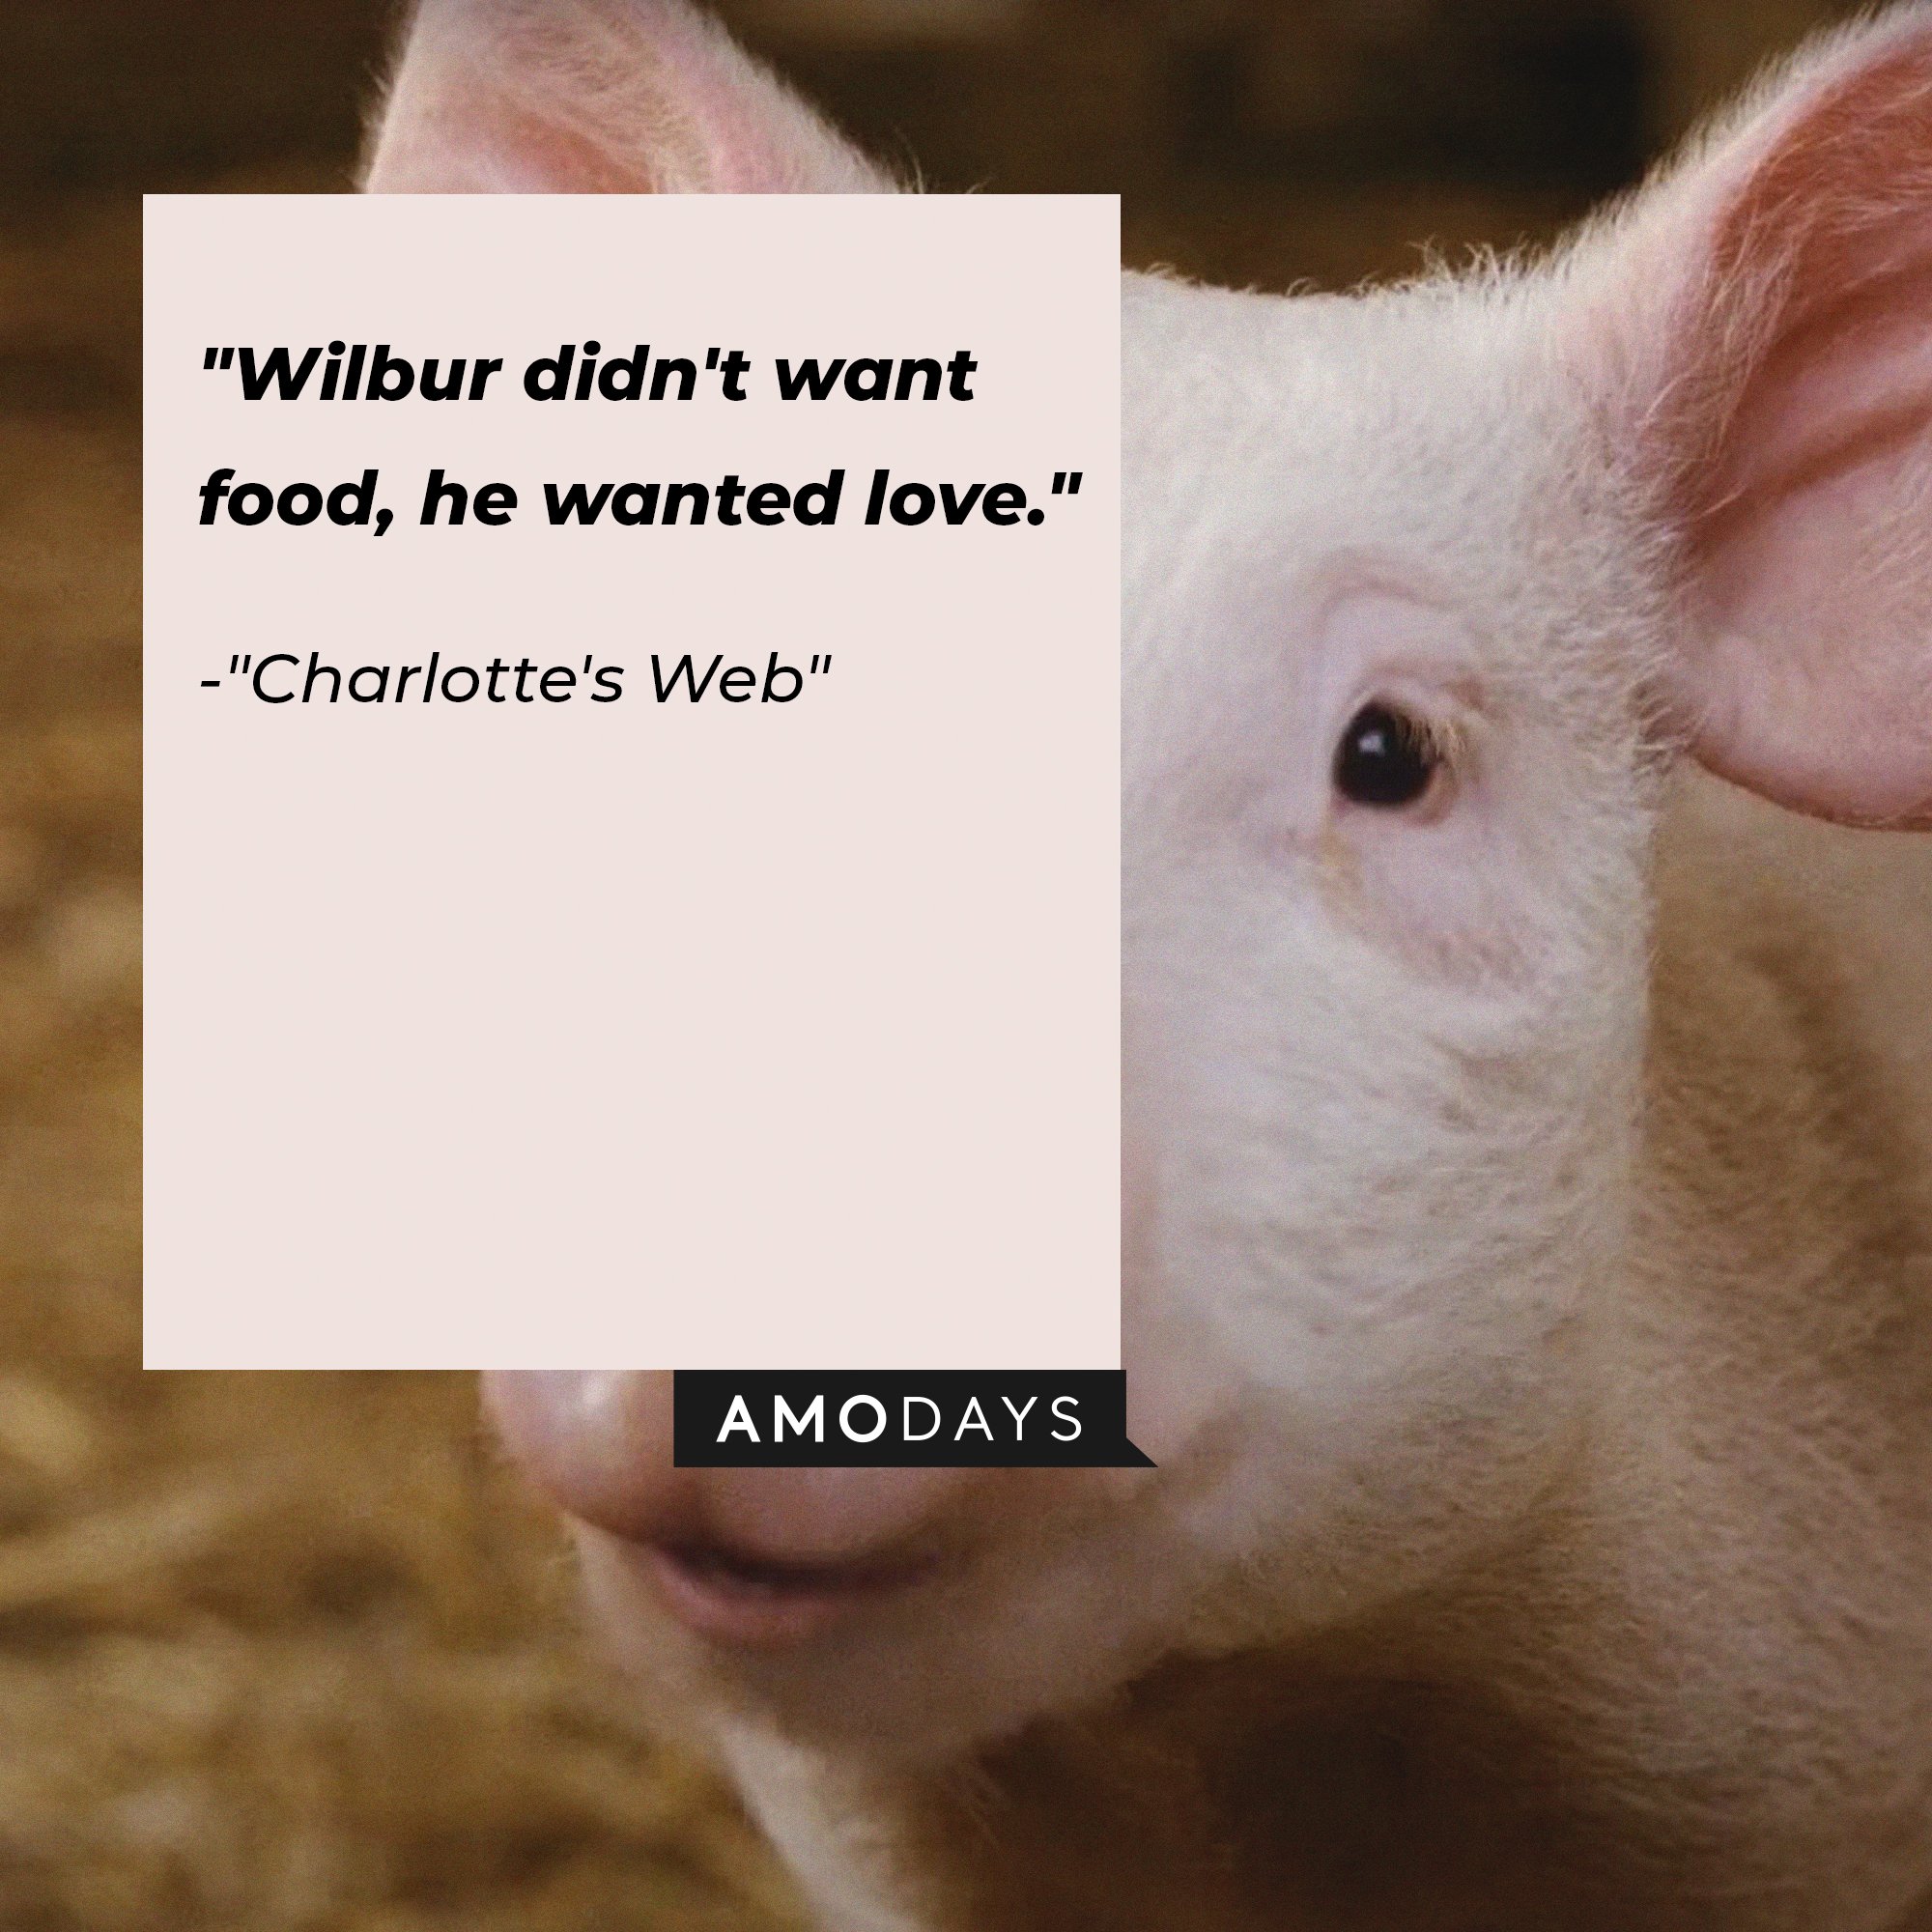 Charlotte's Web quote: "Wilbur didn't want food, he wanted love." | Image: AmoDays